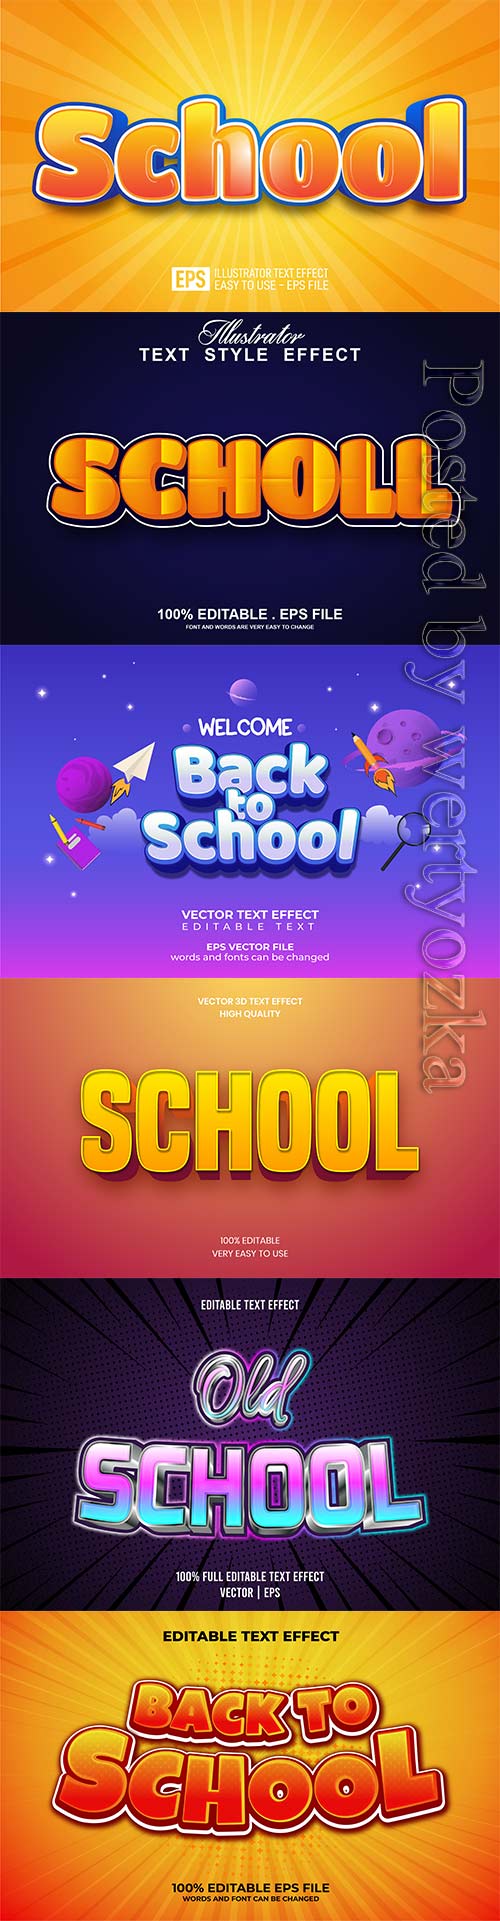 Back to school editable text effect vol 18